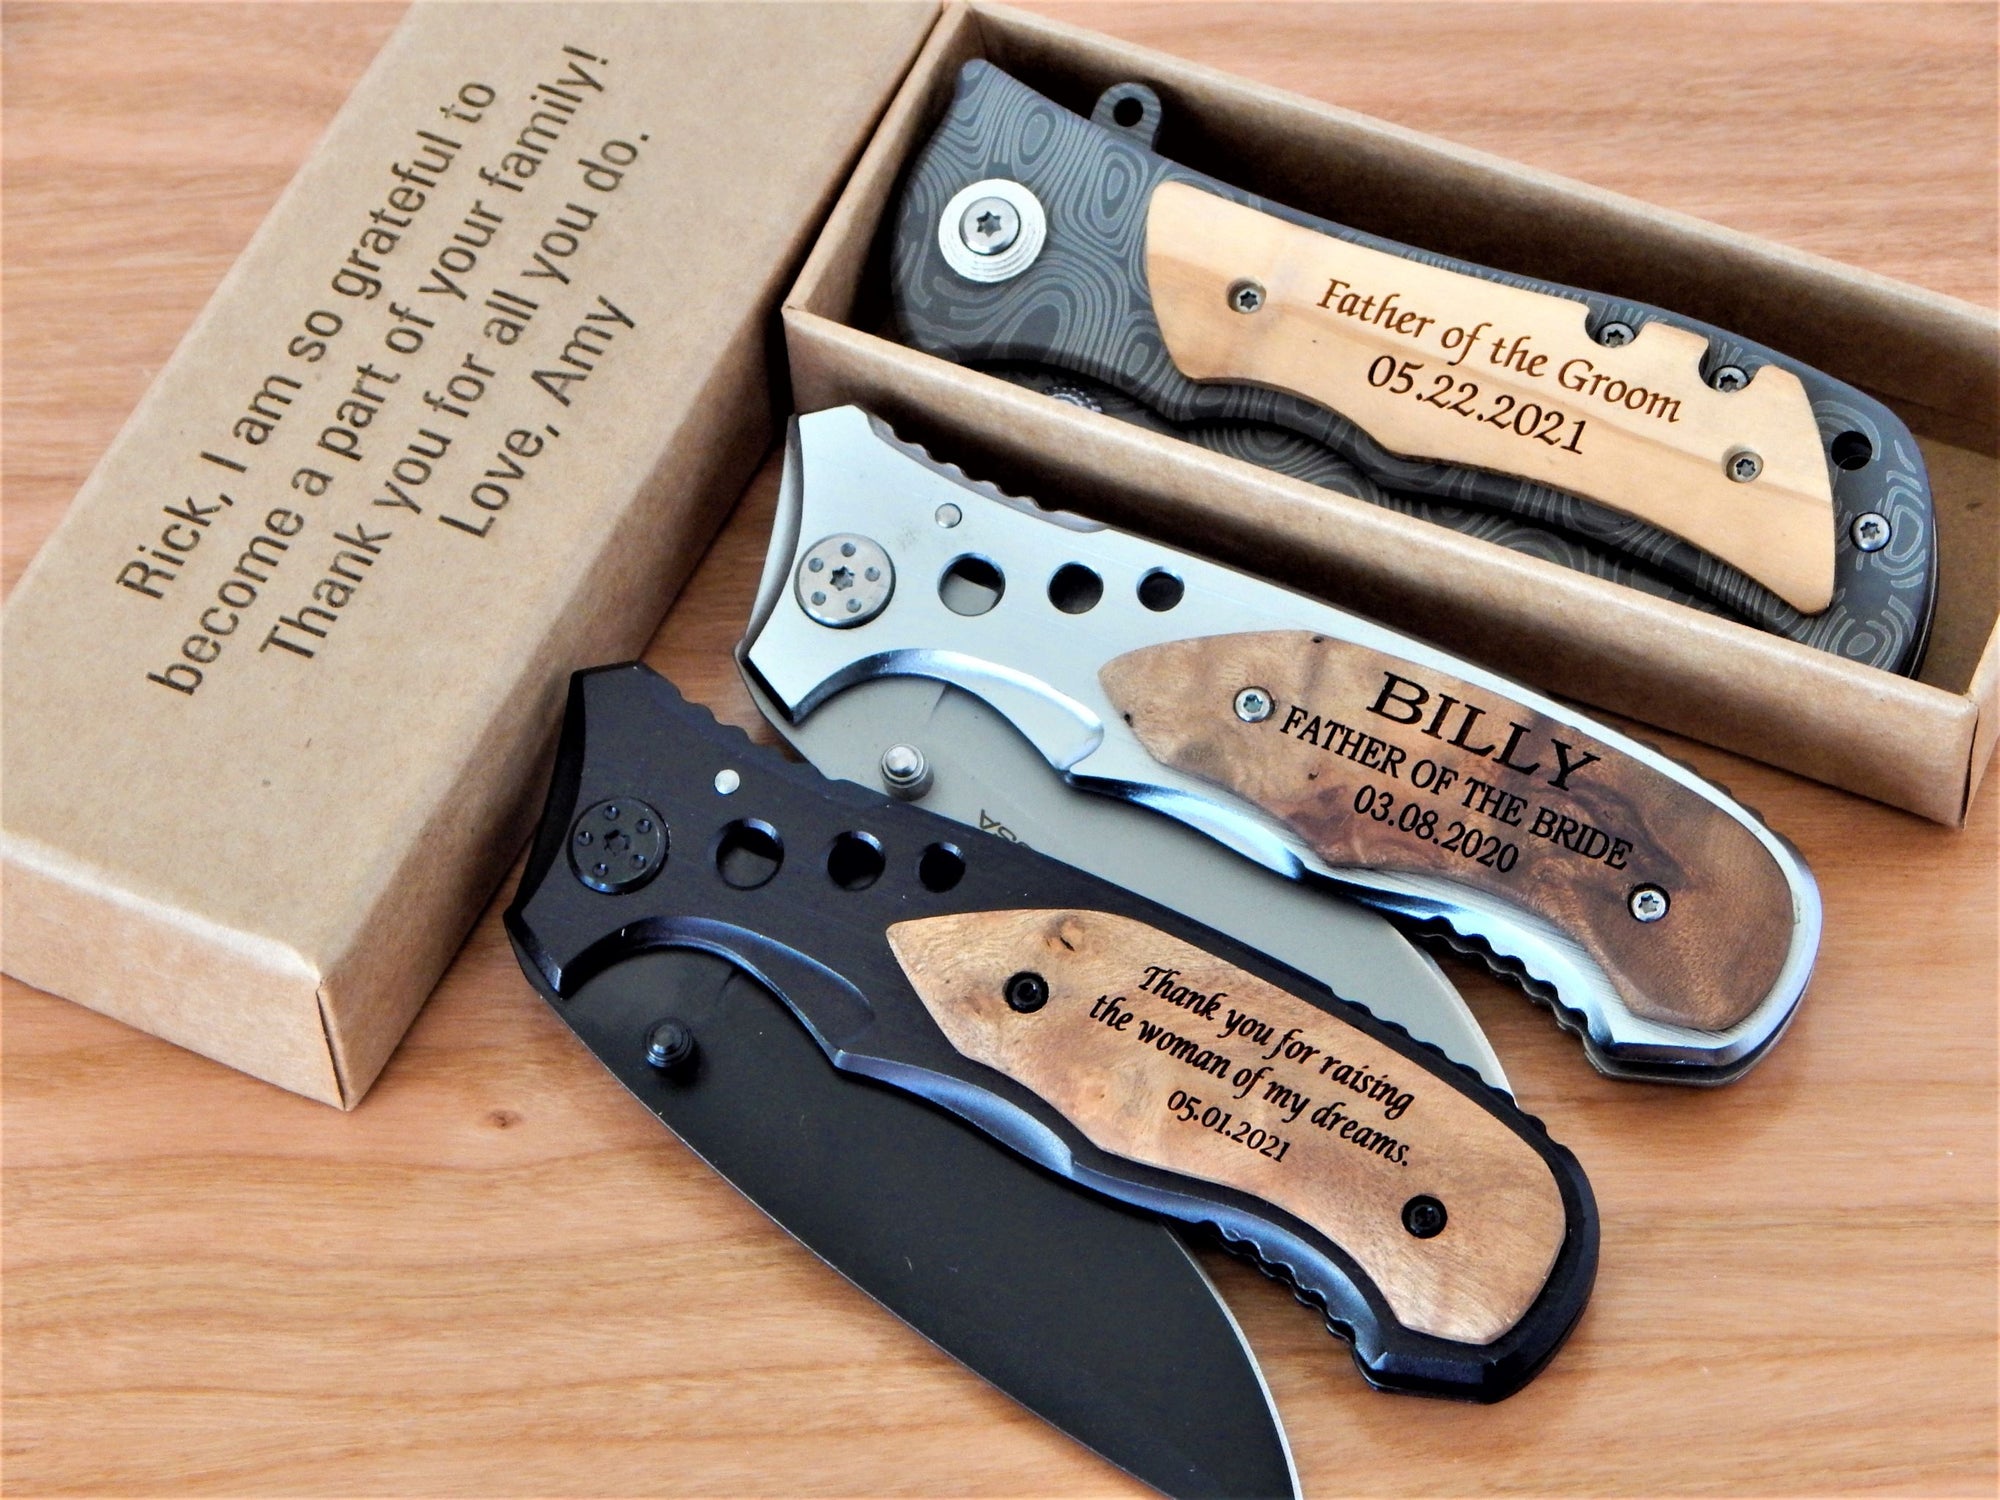 Wedding Gift for Father of the Bride  | Engraved Groomsmen Knife